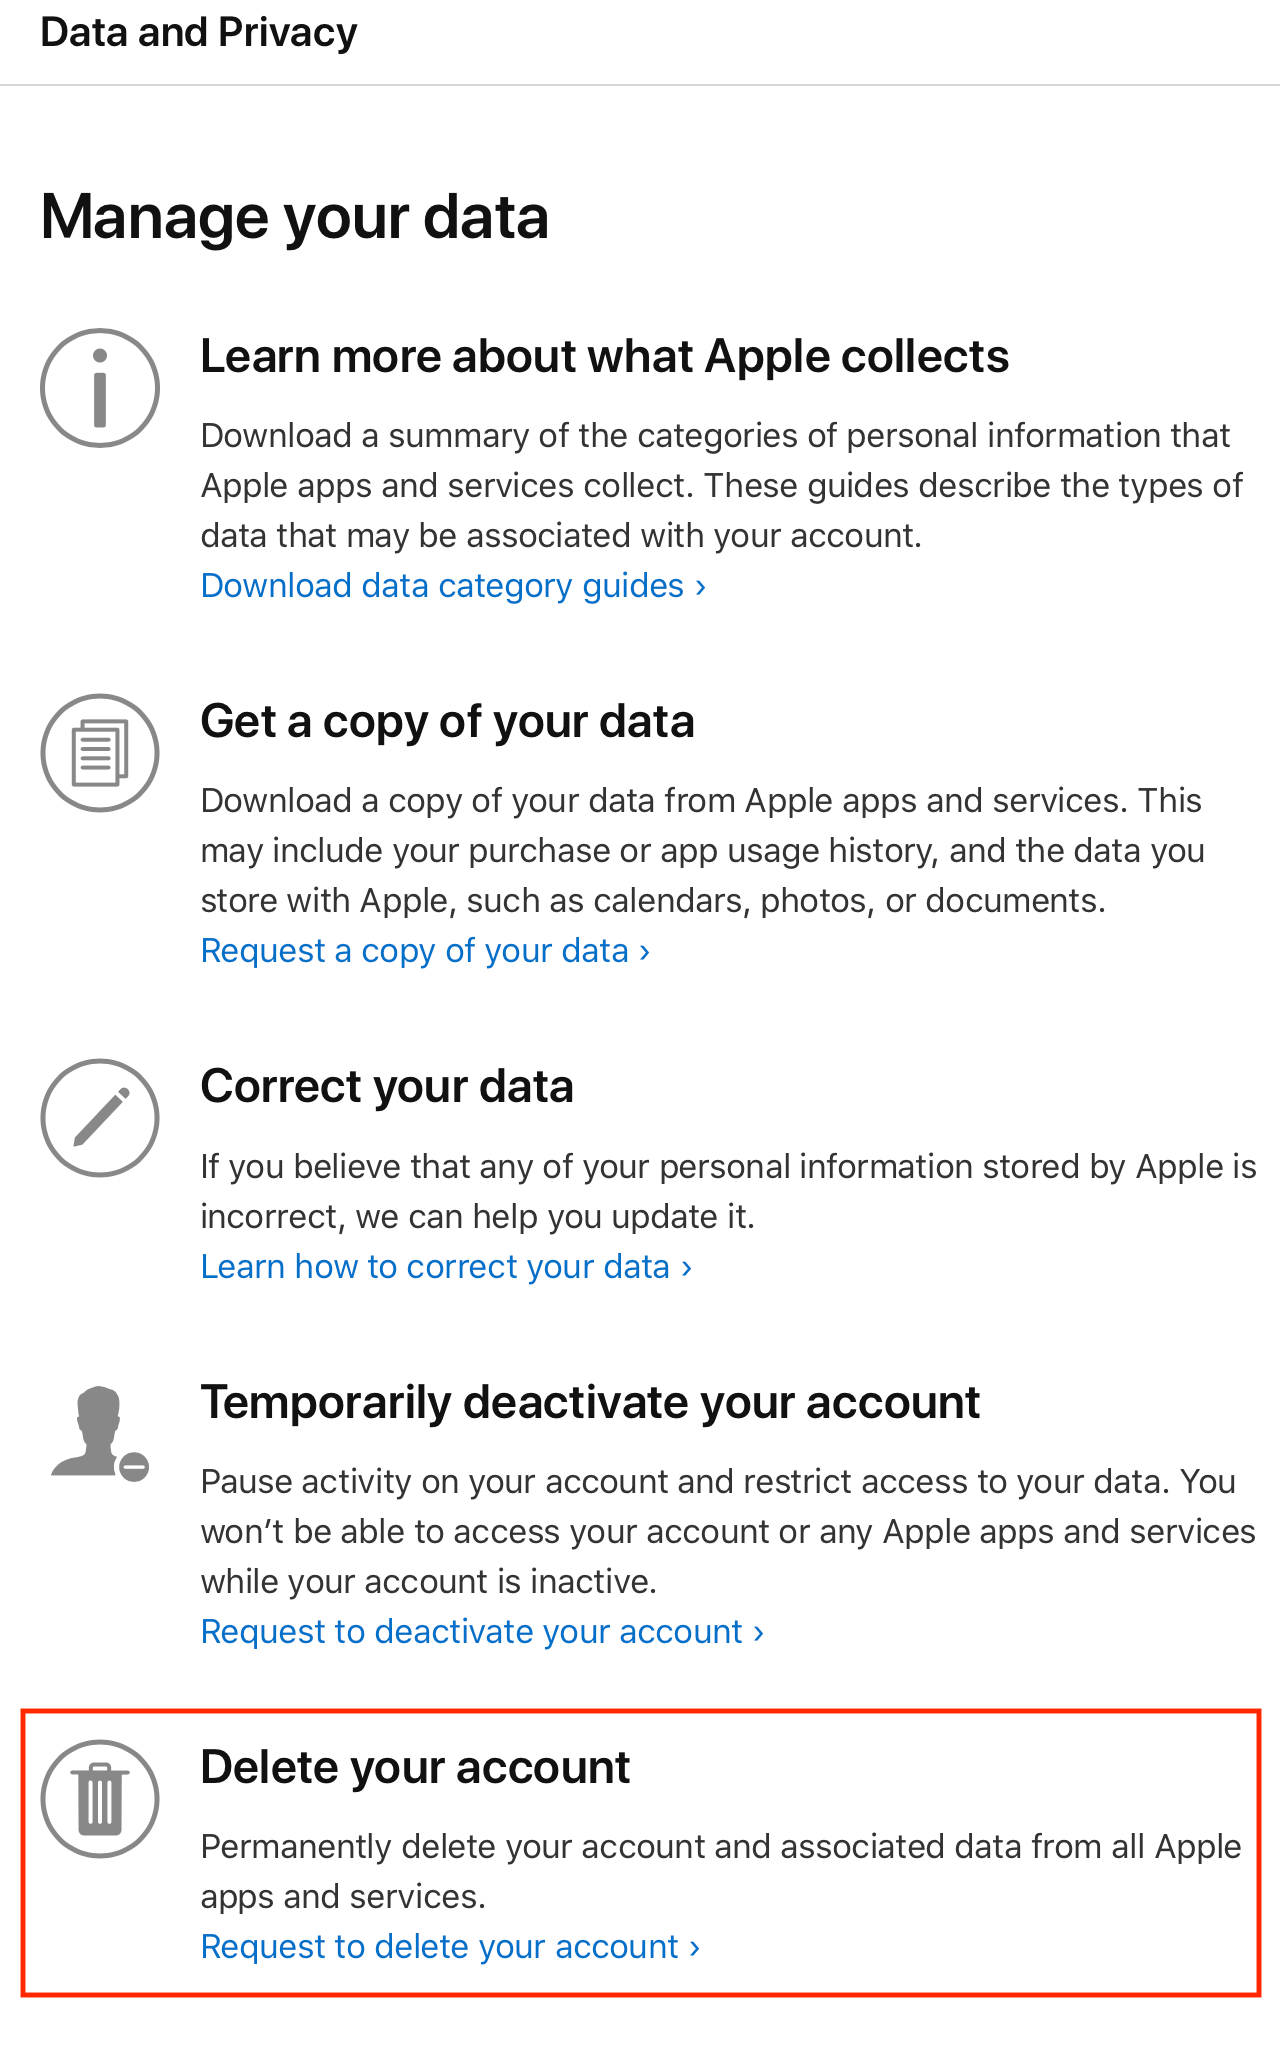 Apple's data and privacy options